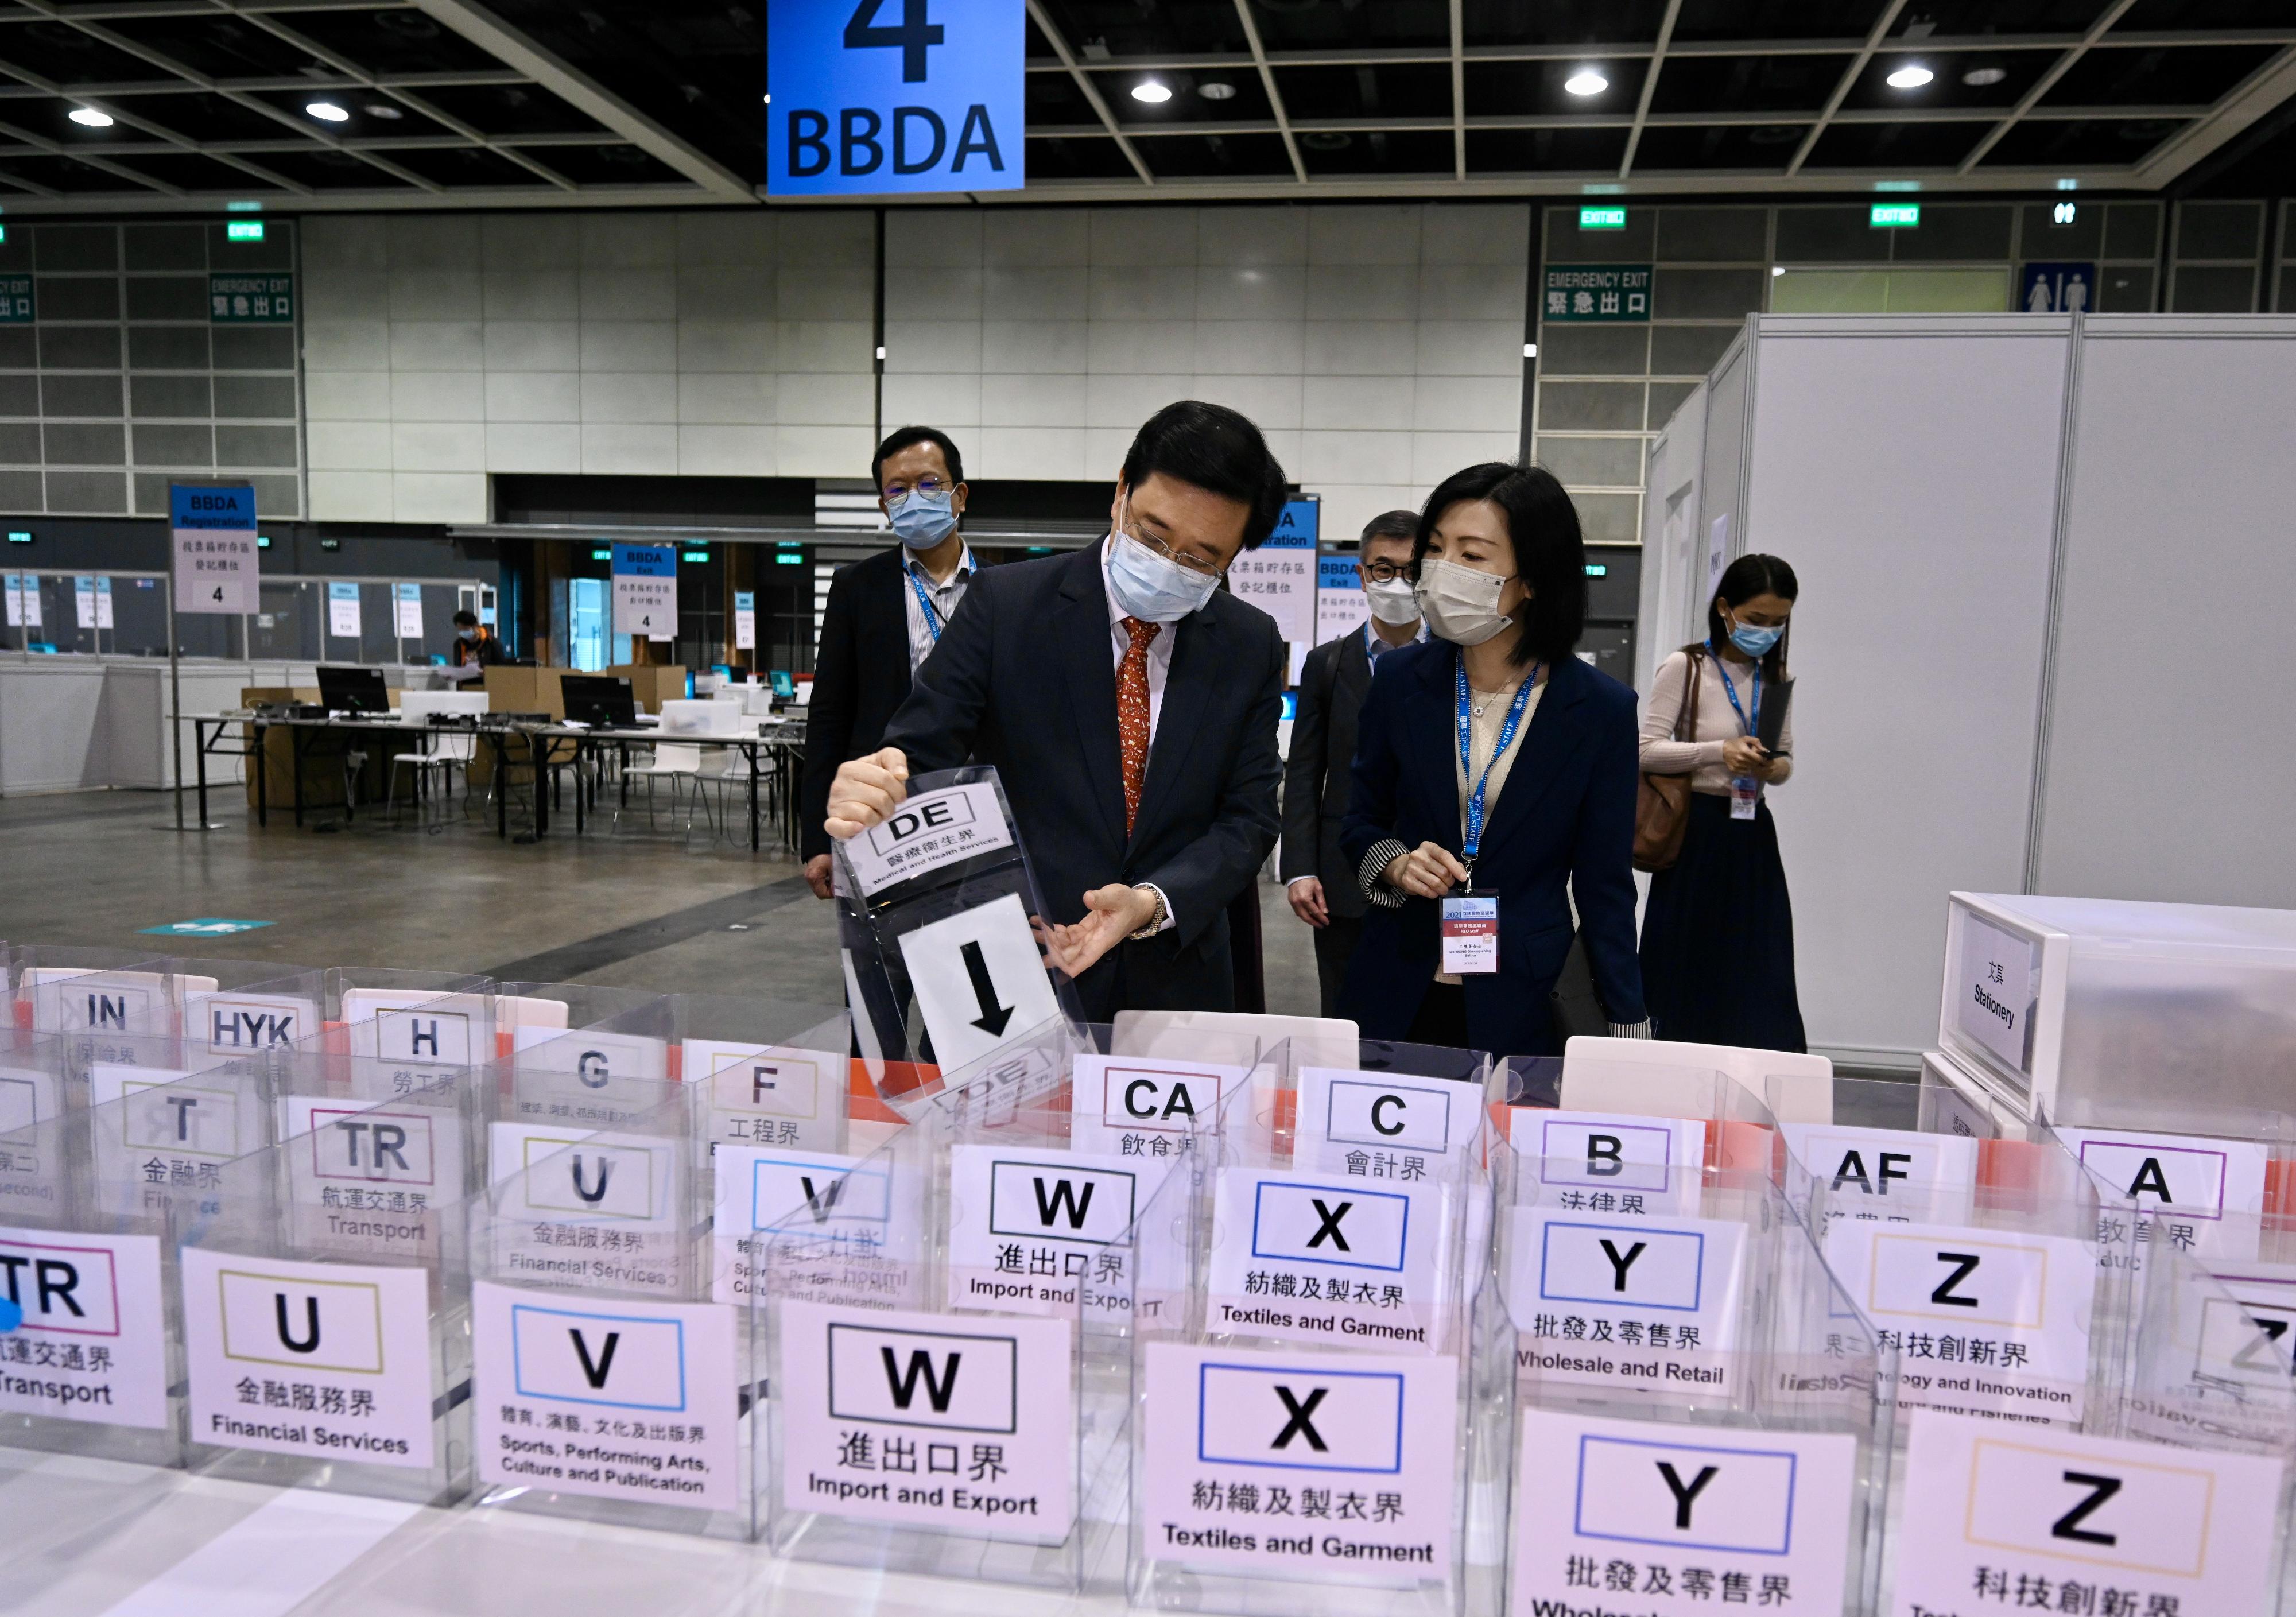 The Chief Secretary for Administration, Mr John Lee, visited the Hong Kong Convention and Exhibition Centre today (December 17) to inspect the preparatory work progress of the central counting station for the Legislative Council General Election. Photo shows Mr Lee (left) being briefed by a staff member on the preparations for the counting procedures.